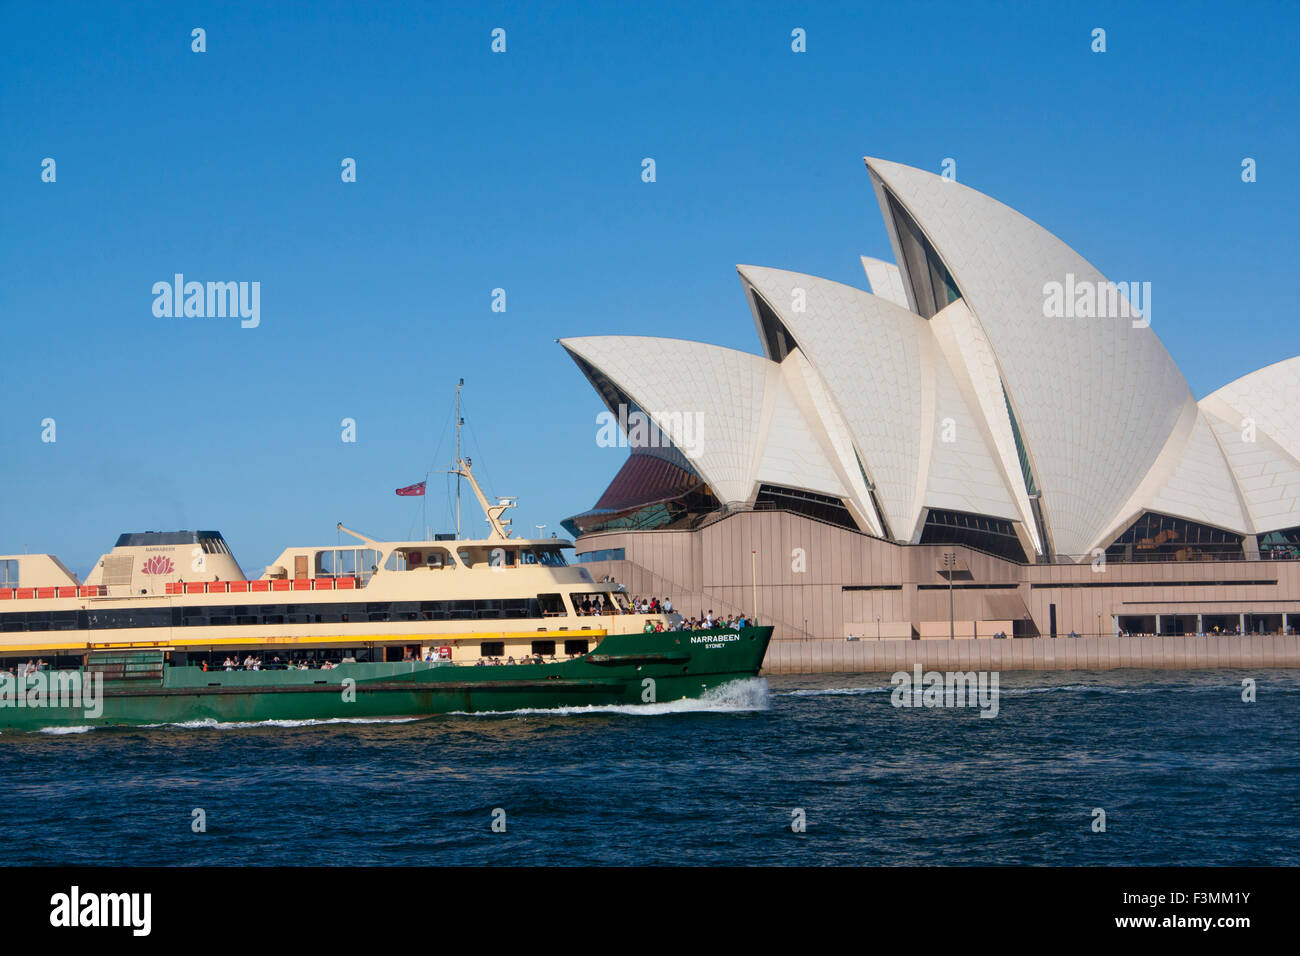 Sydney ferry Narrabeen passing Opera House on approach to Circular Quay Sydney Cove Sydney NSW Australia Stock Photo